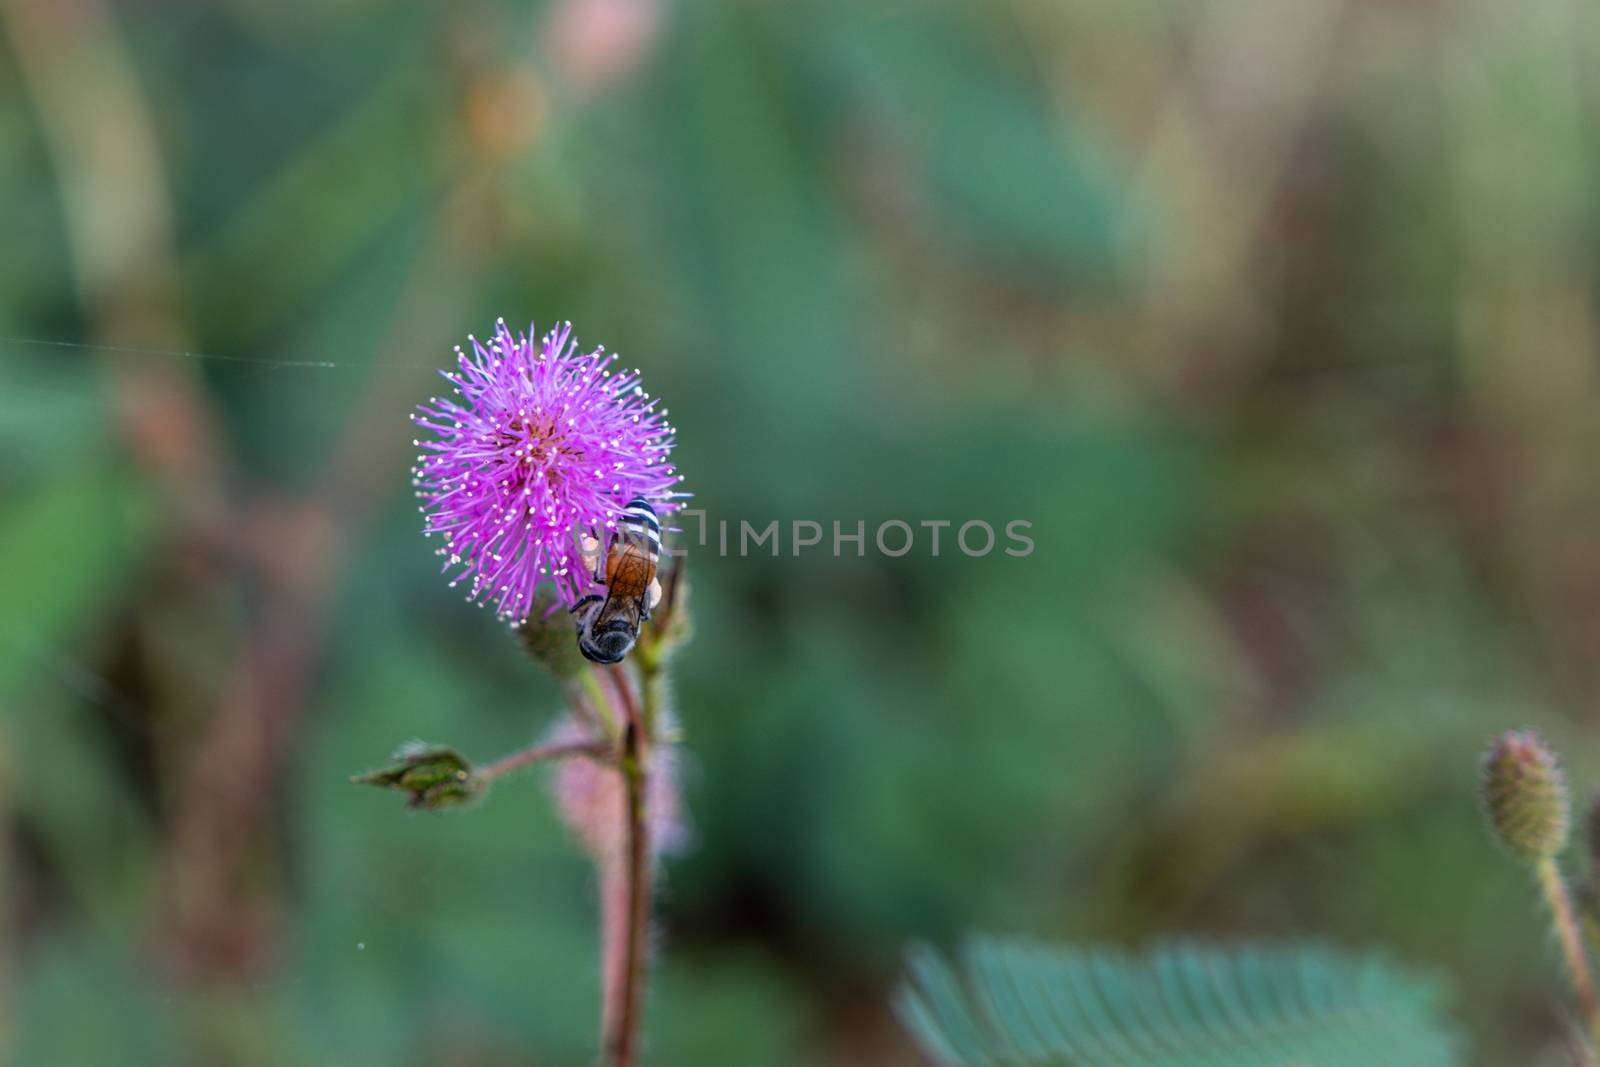 The Closeup to Sensitive Plant Flower, Mimosa Pudica with small bee on blur background by peerapixs